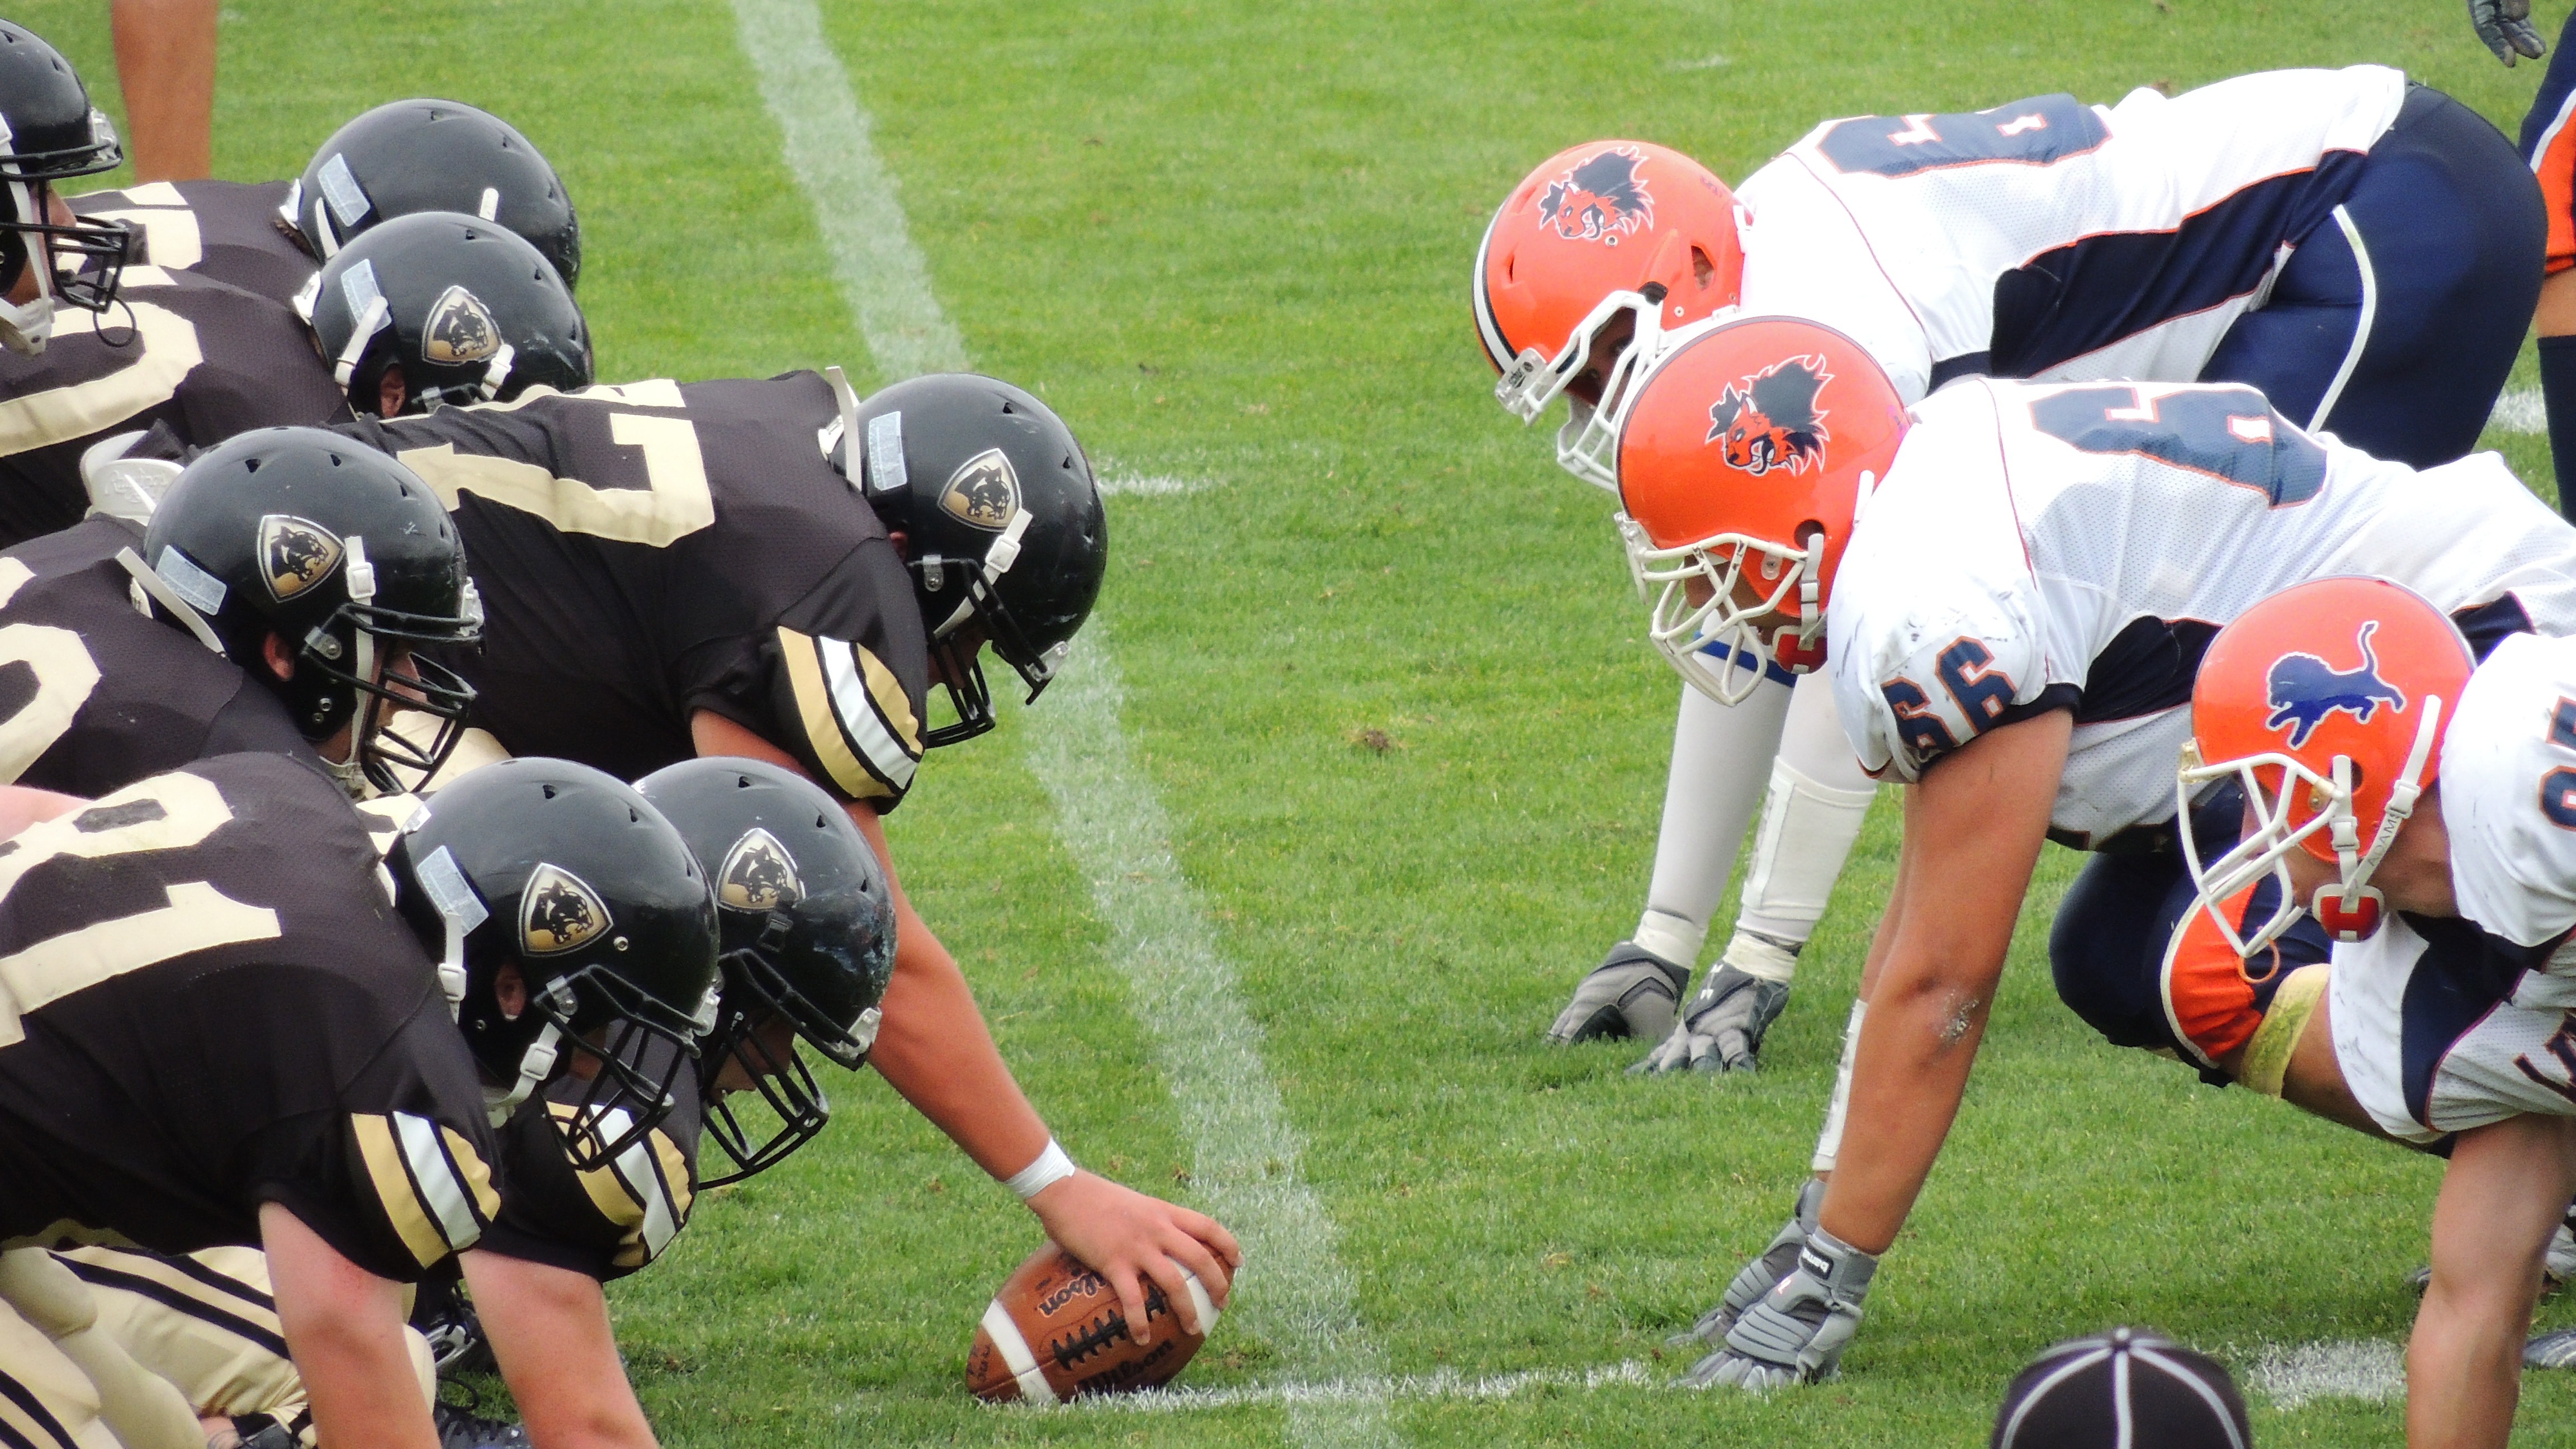 What Can American Football Learn From Rugby? | The Growth of a Game